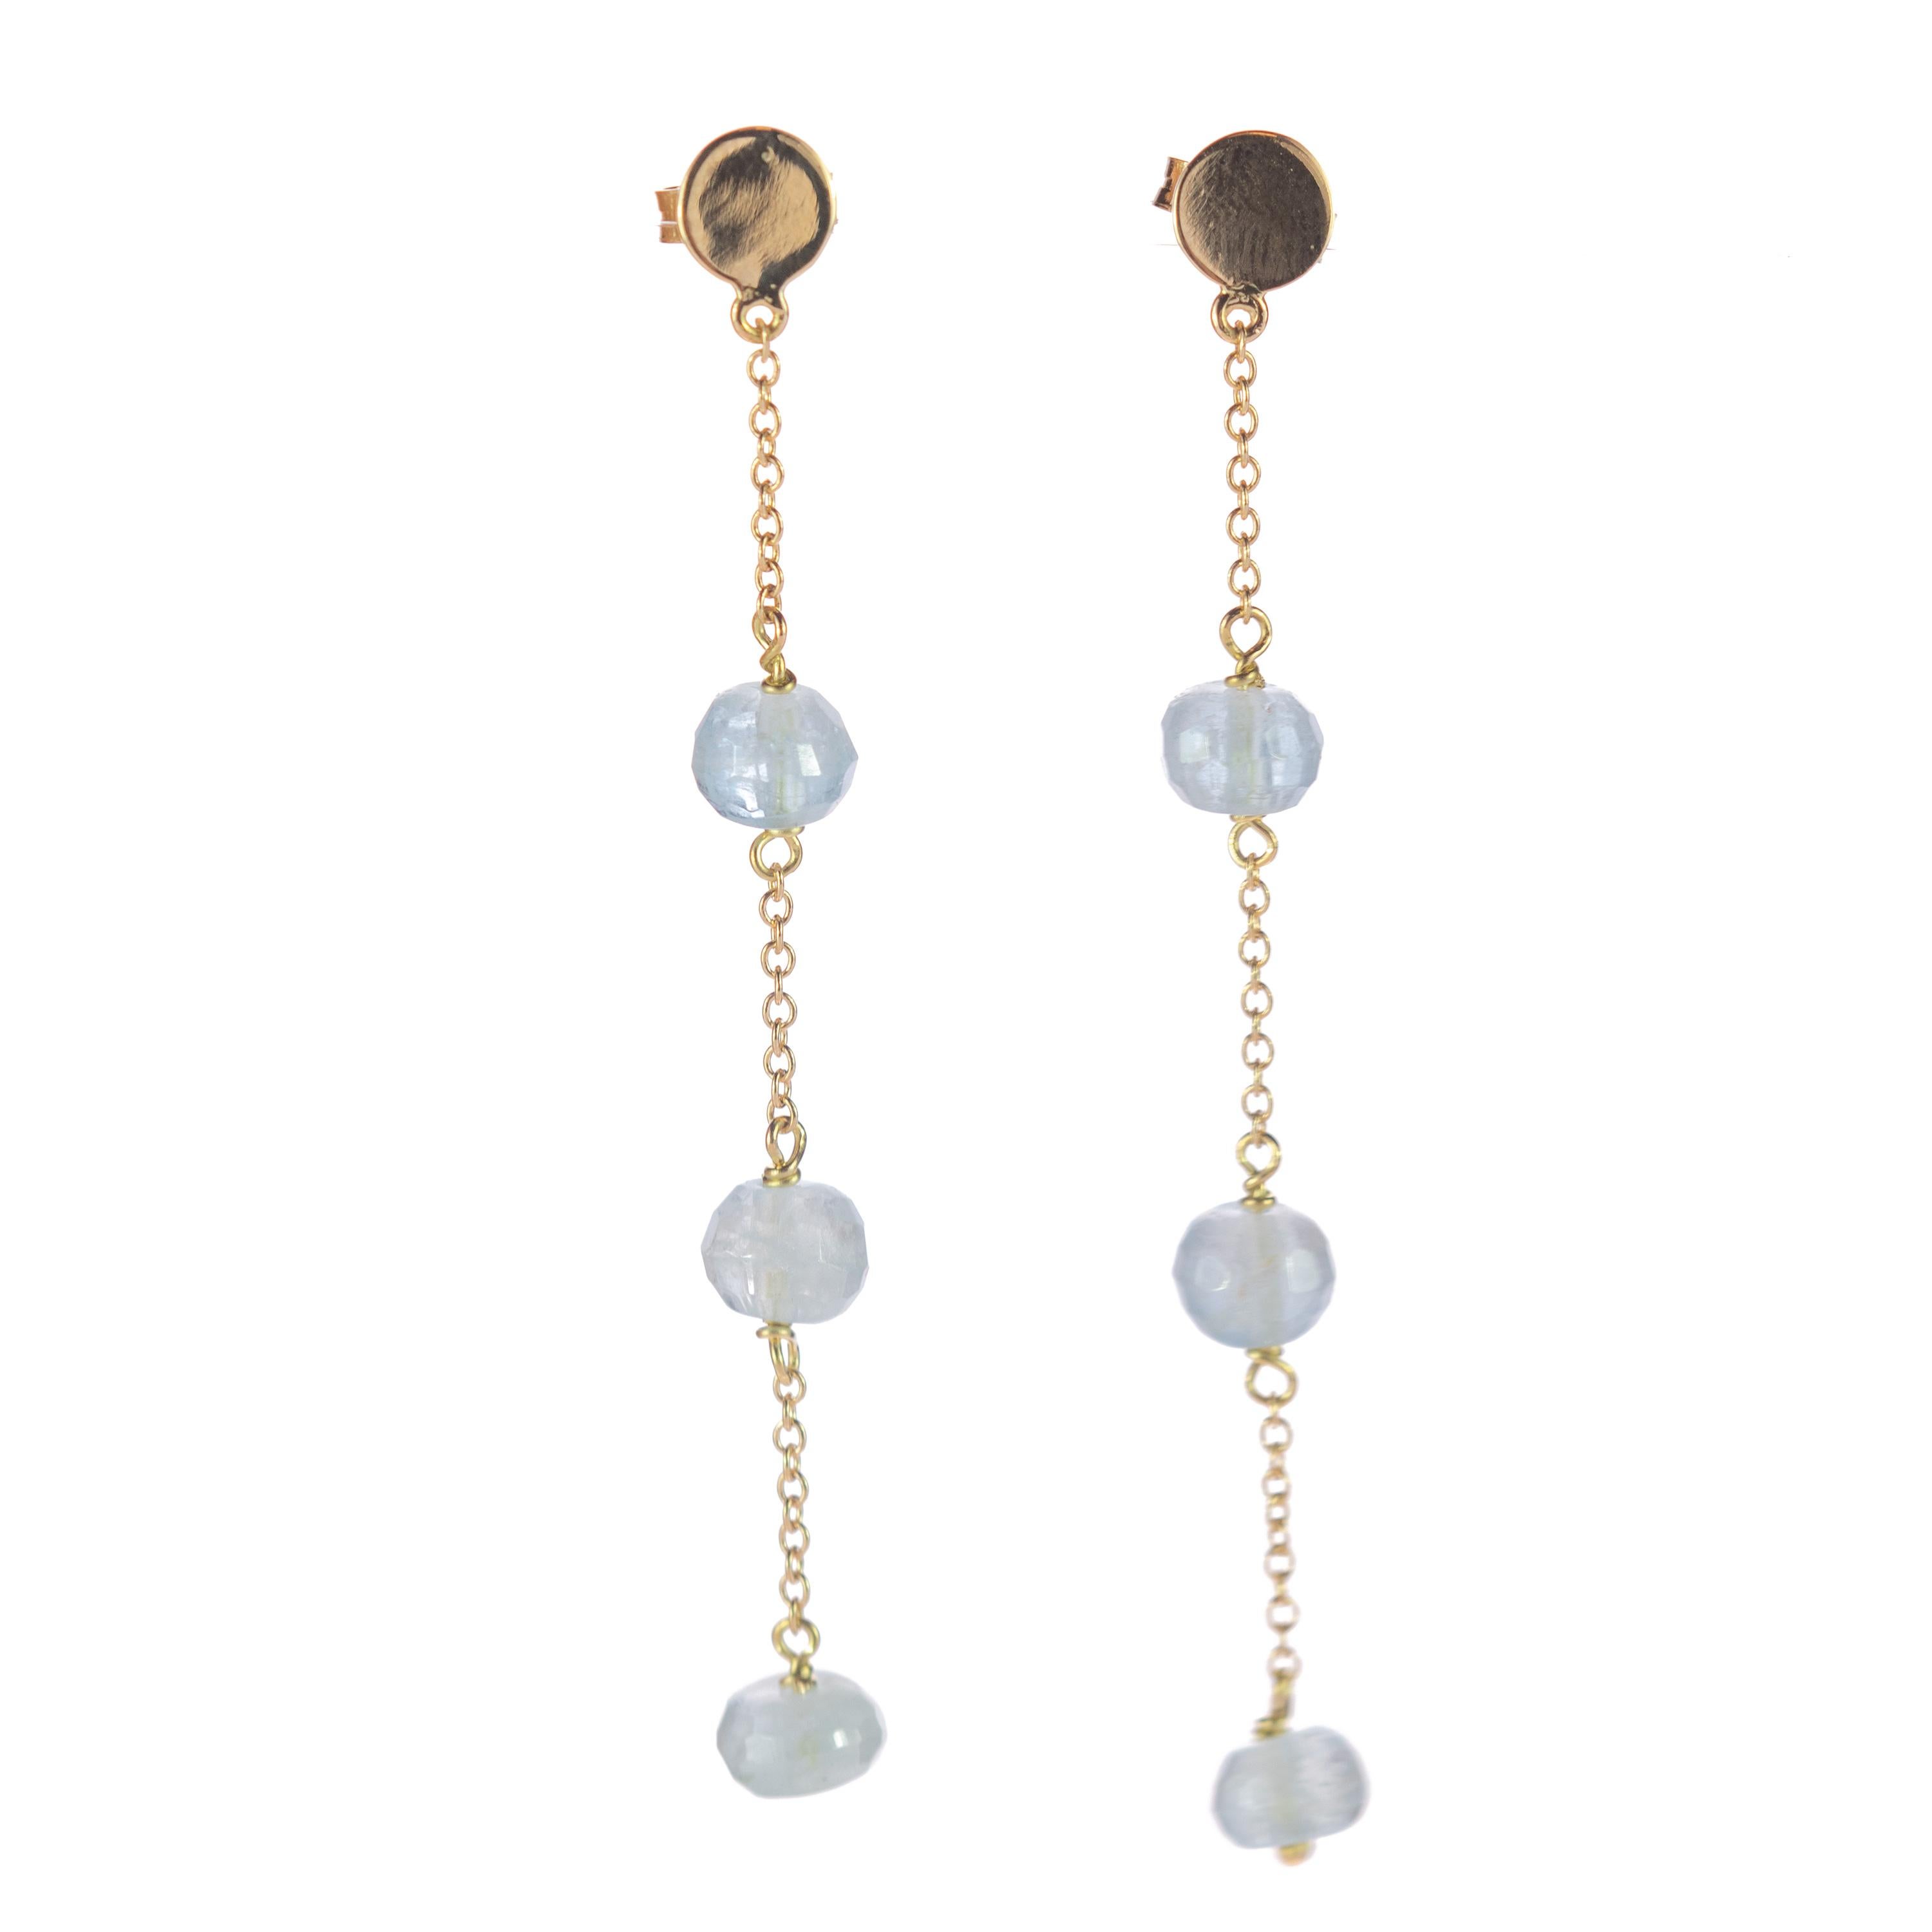 Intini Jewels signature quality on a modern and contemporary design jewel. Stunning earrings with three aquamarine rondelles embellished in a 18 karat yellow gold chain.

An elegant touch of glamour at your fingertips. Let yourself be tempted by a